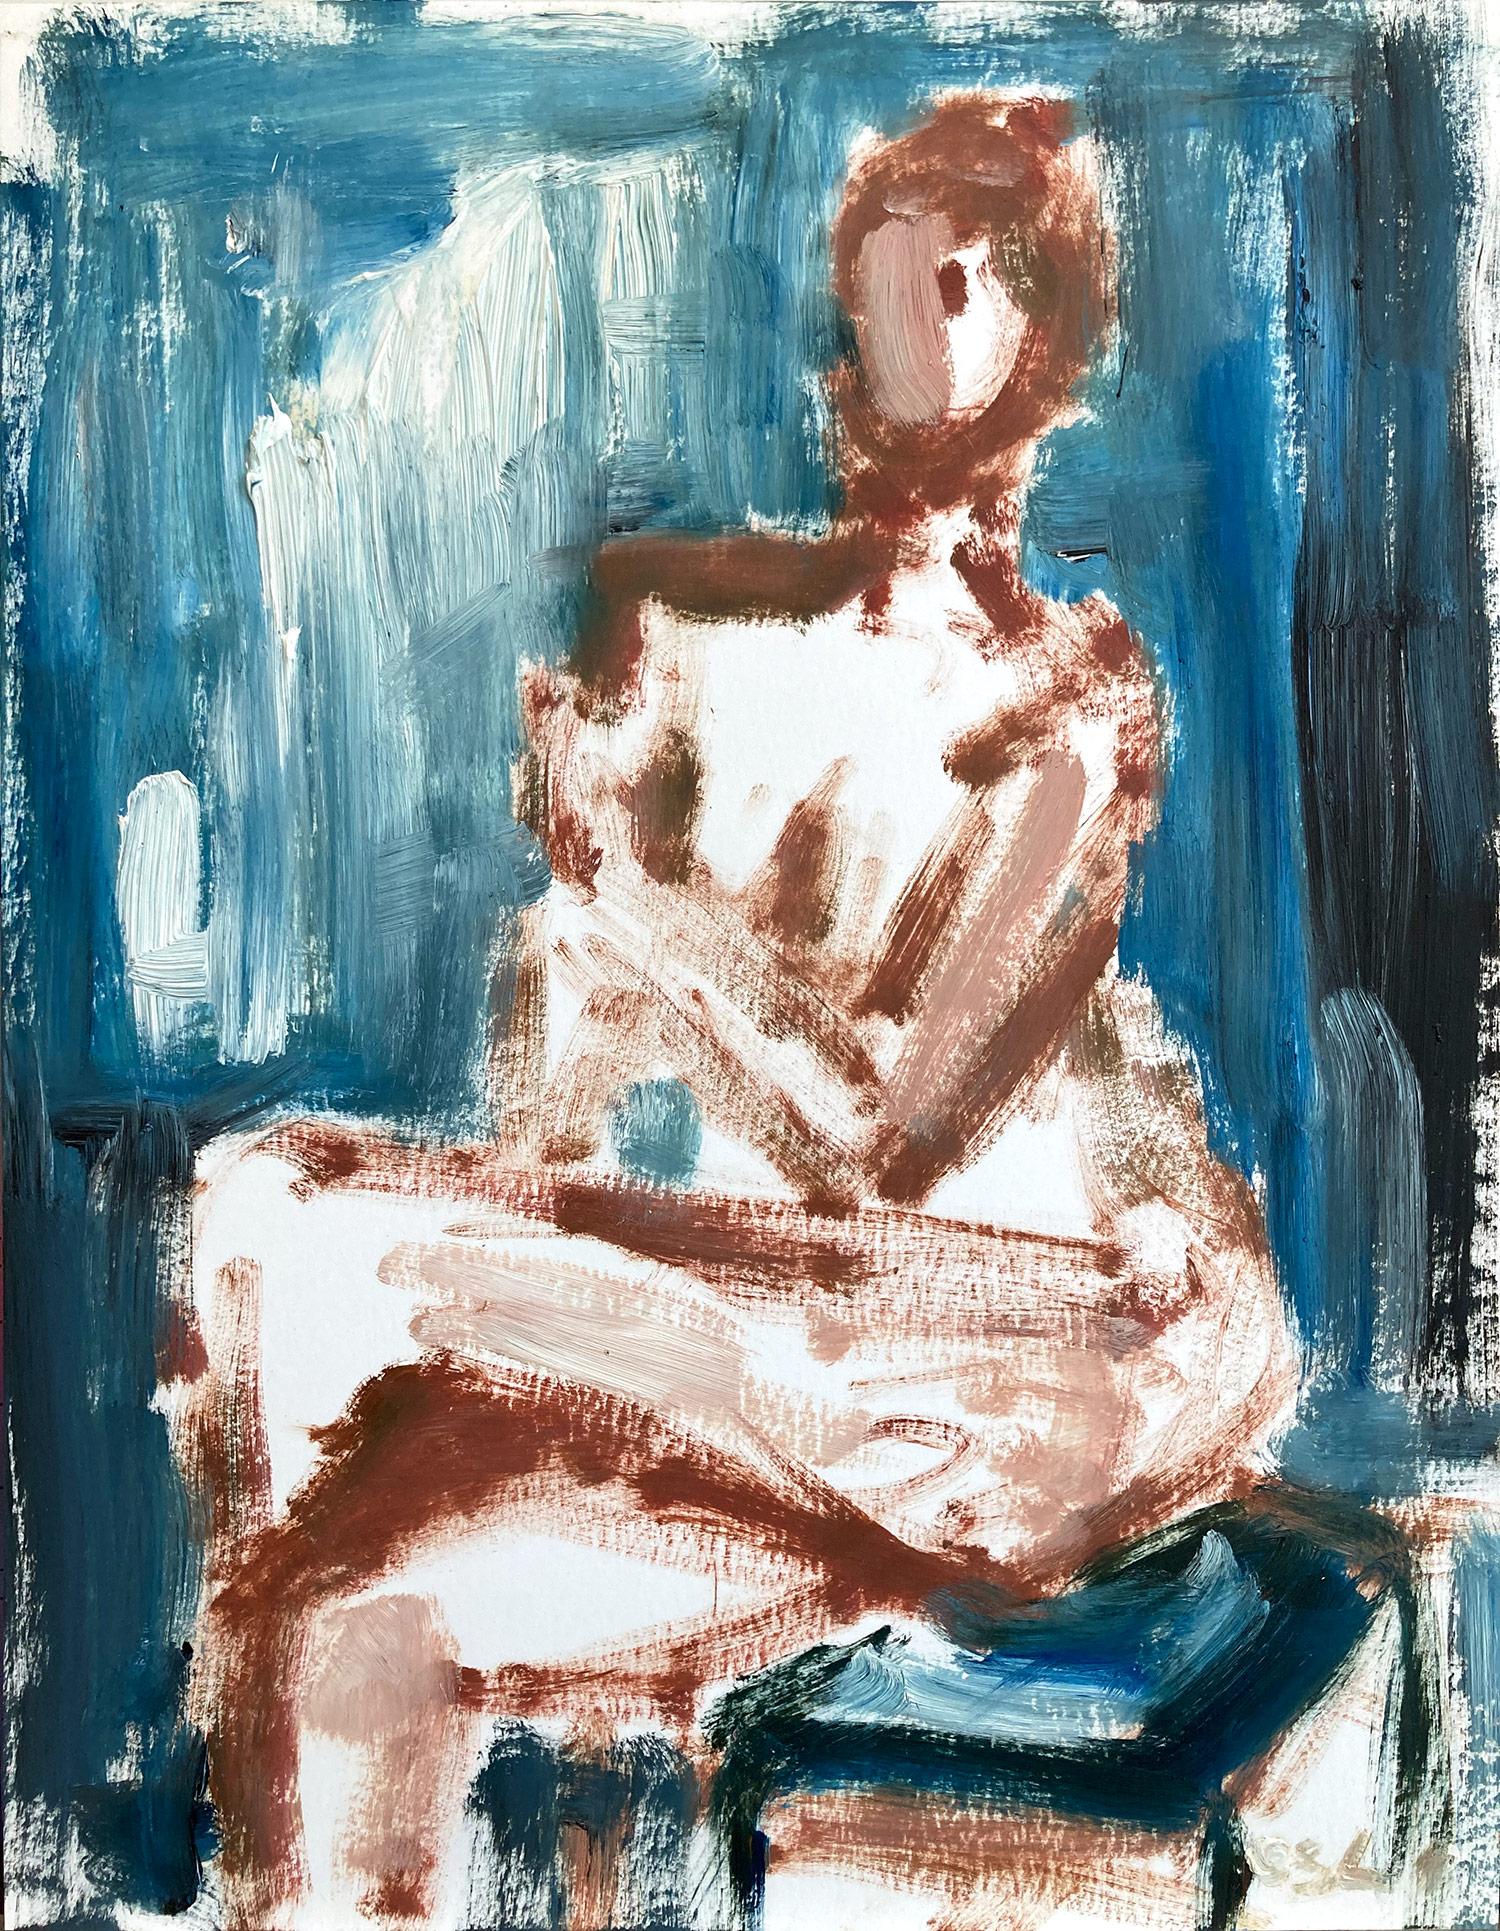 Cindy Shaoul Abstract Painting - "Modigliani Study" After Modigliani Nude Study Oil Painting on Paper